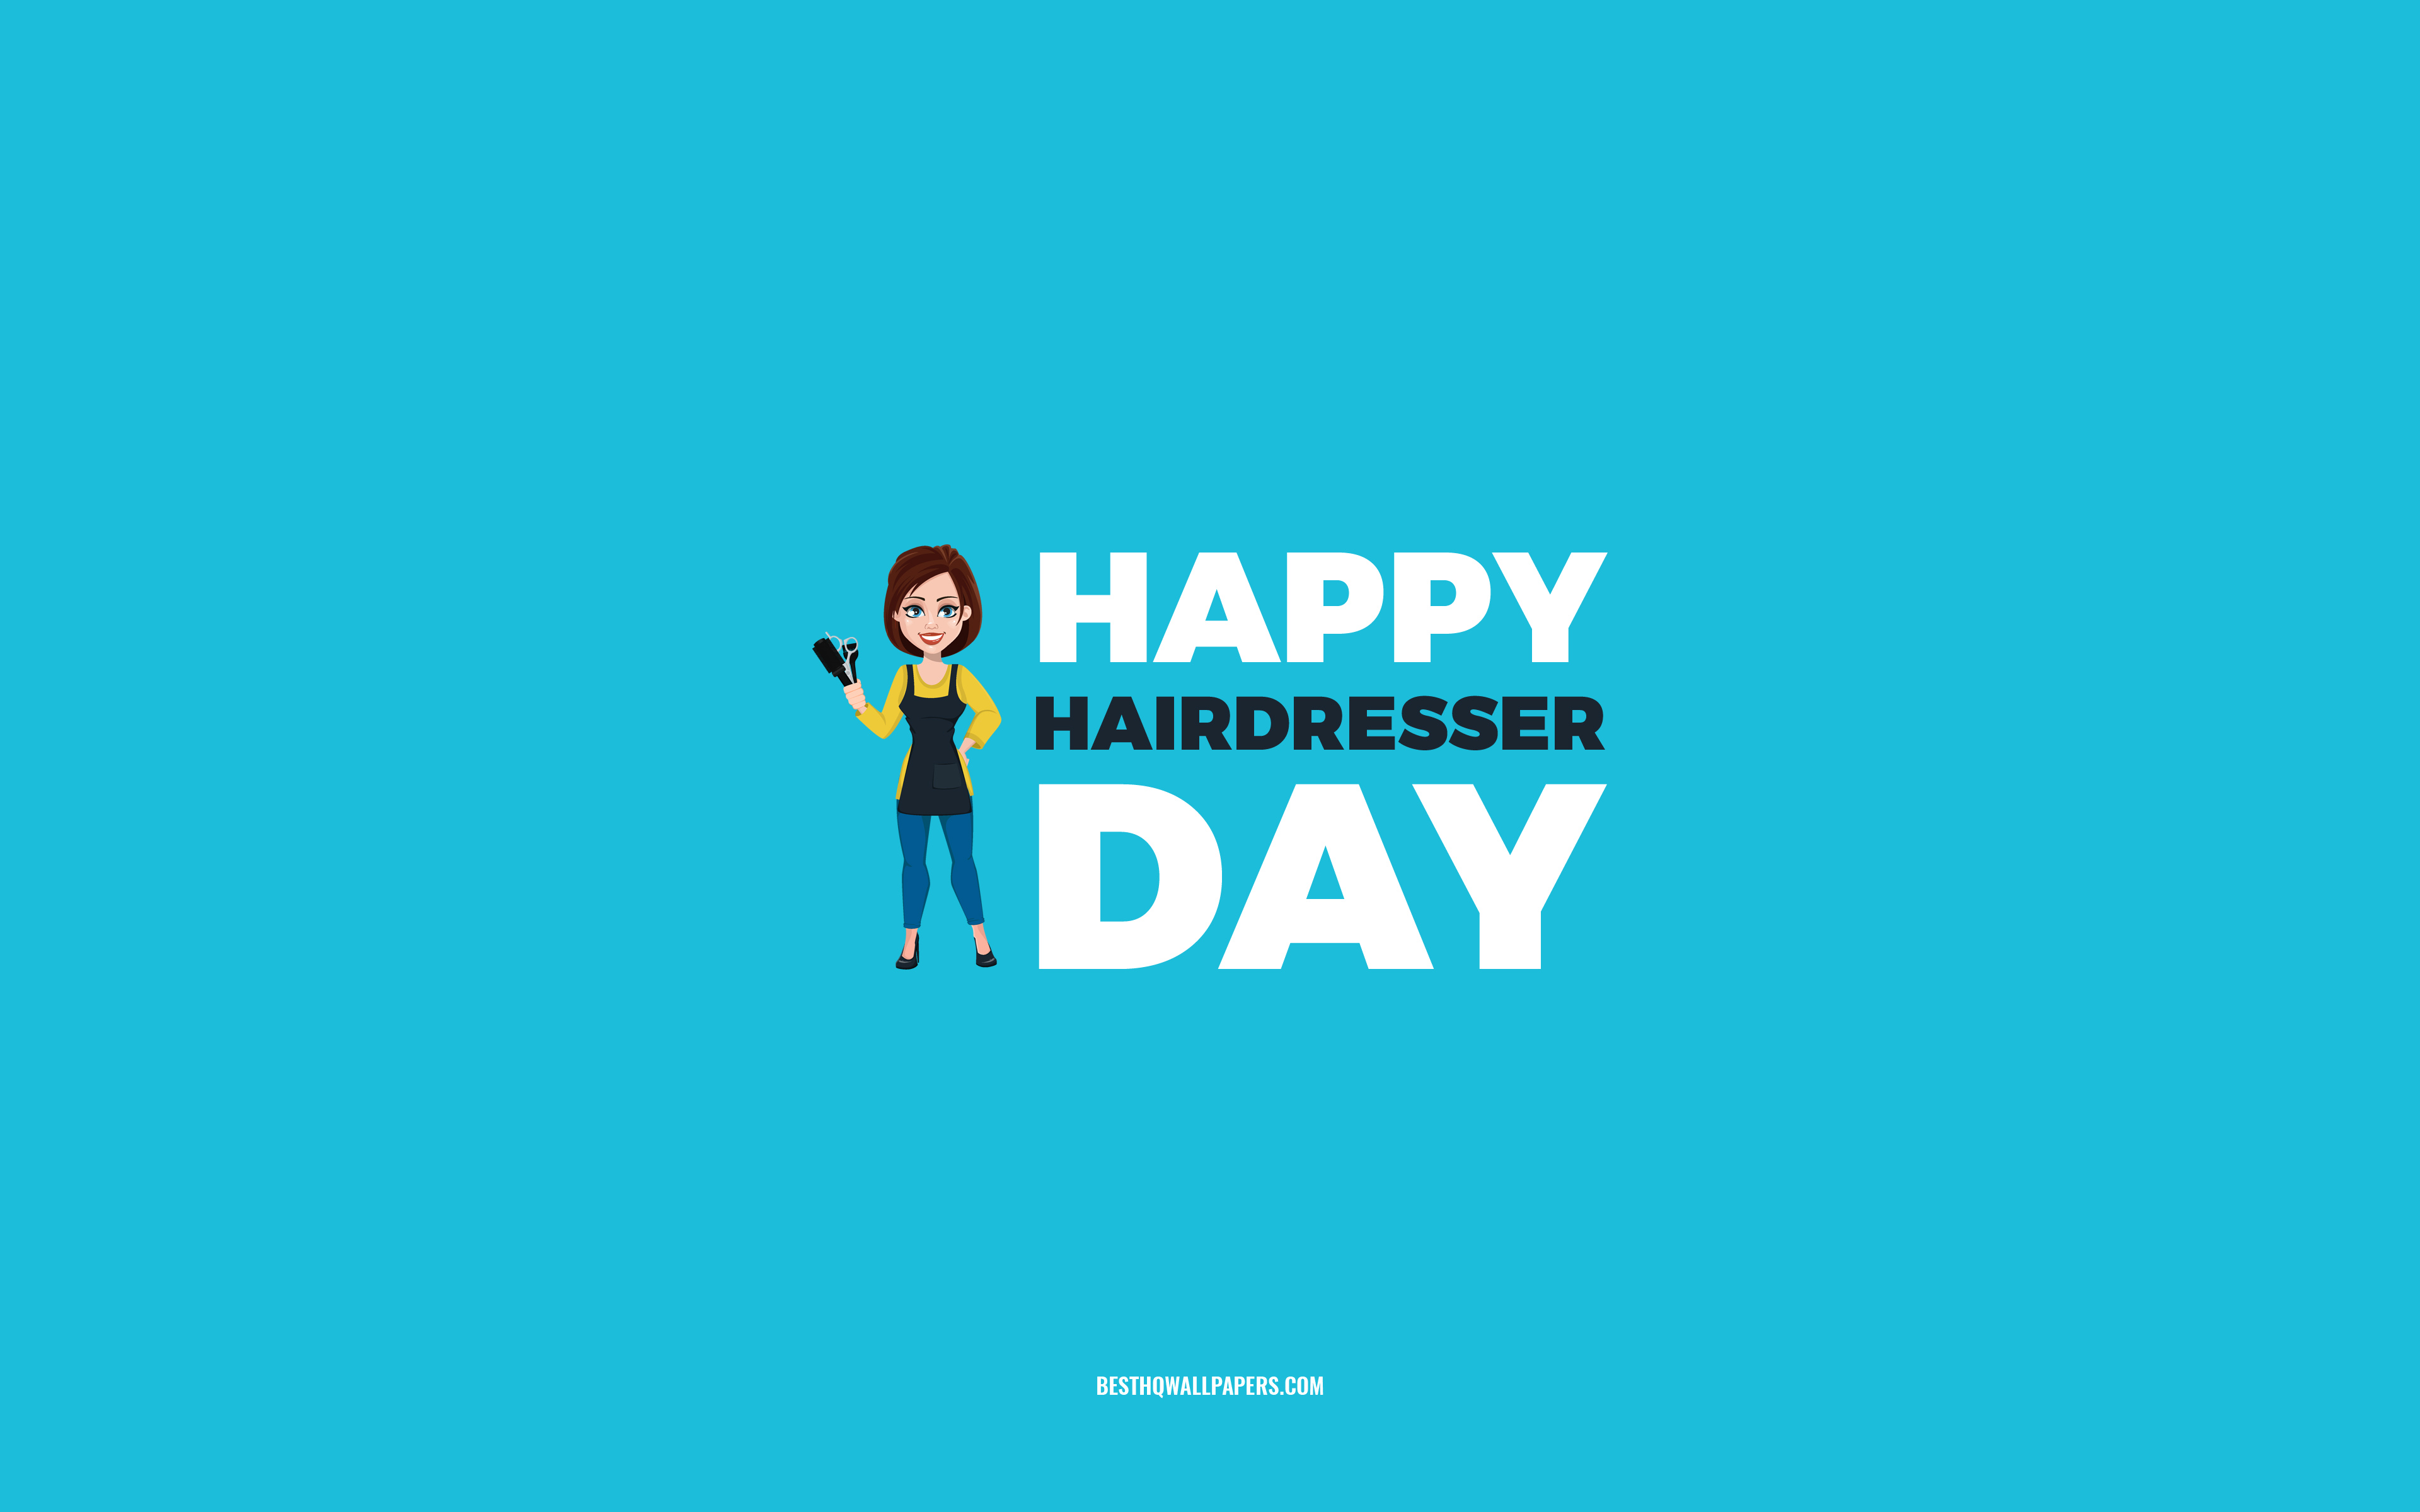 Download wallpapers Happy Hairdresser Day, 4k, blue background